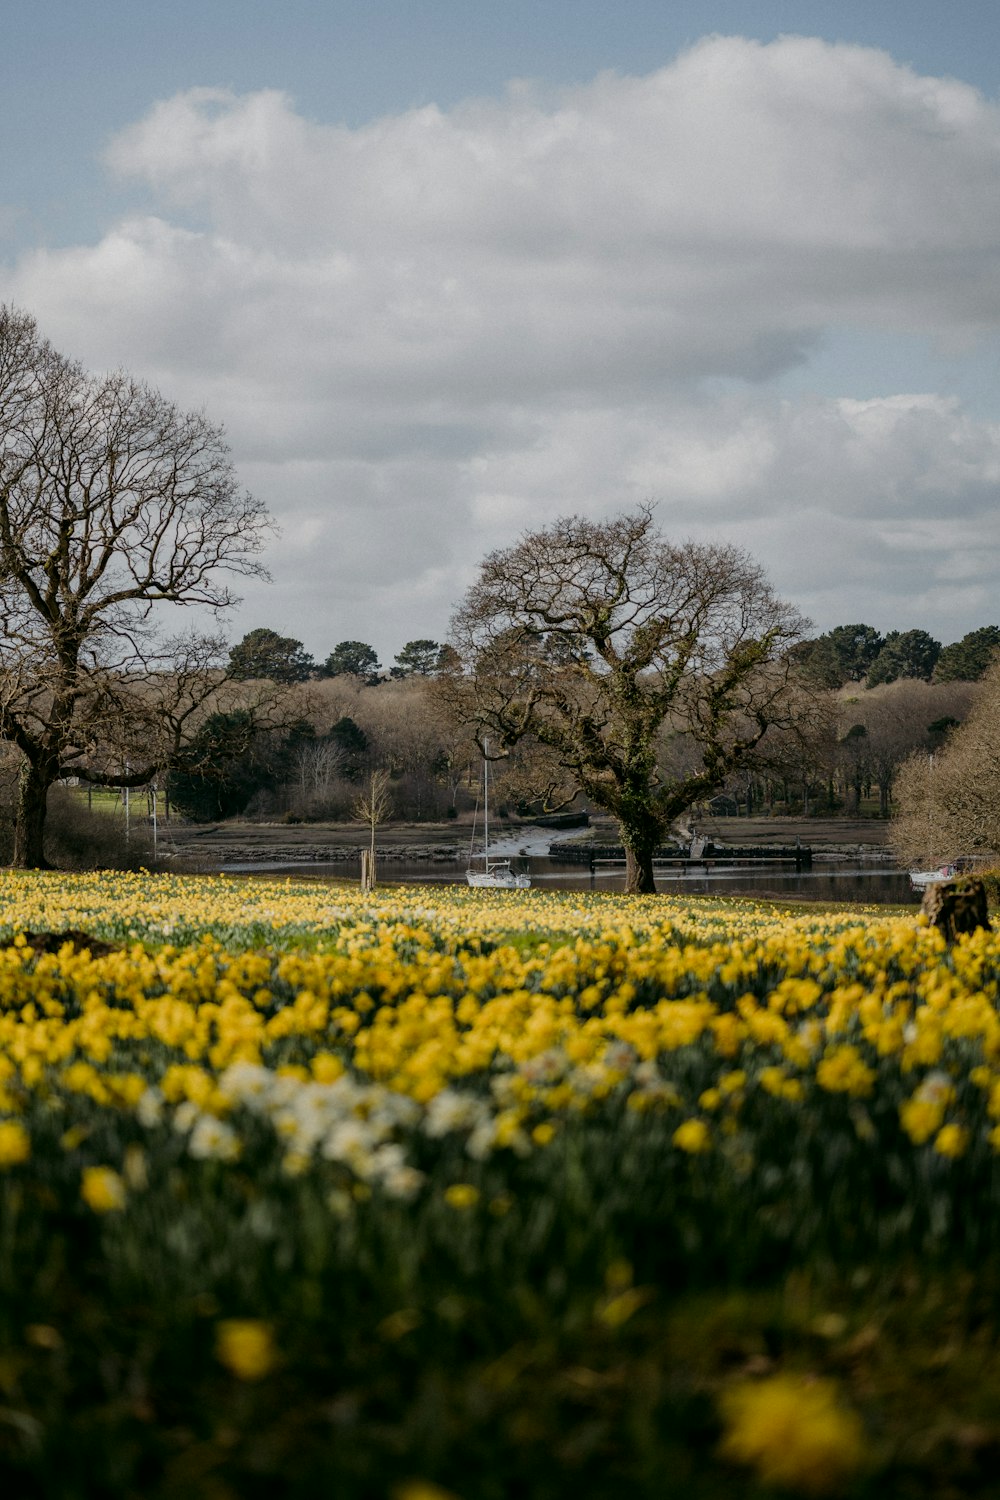 yellow flower field near bare trees under white clouds during daytime